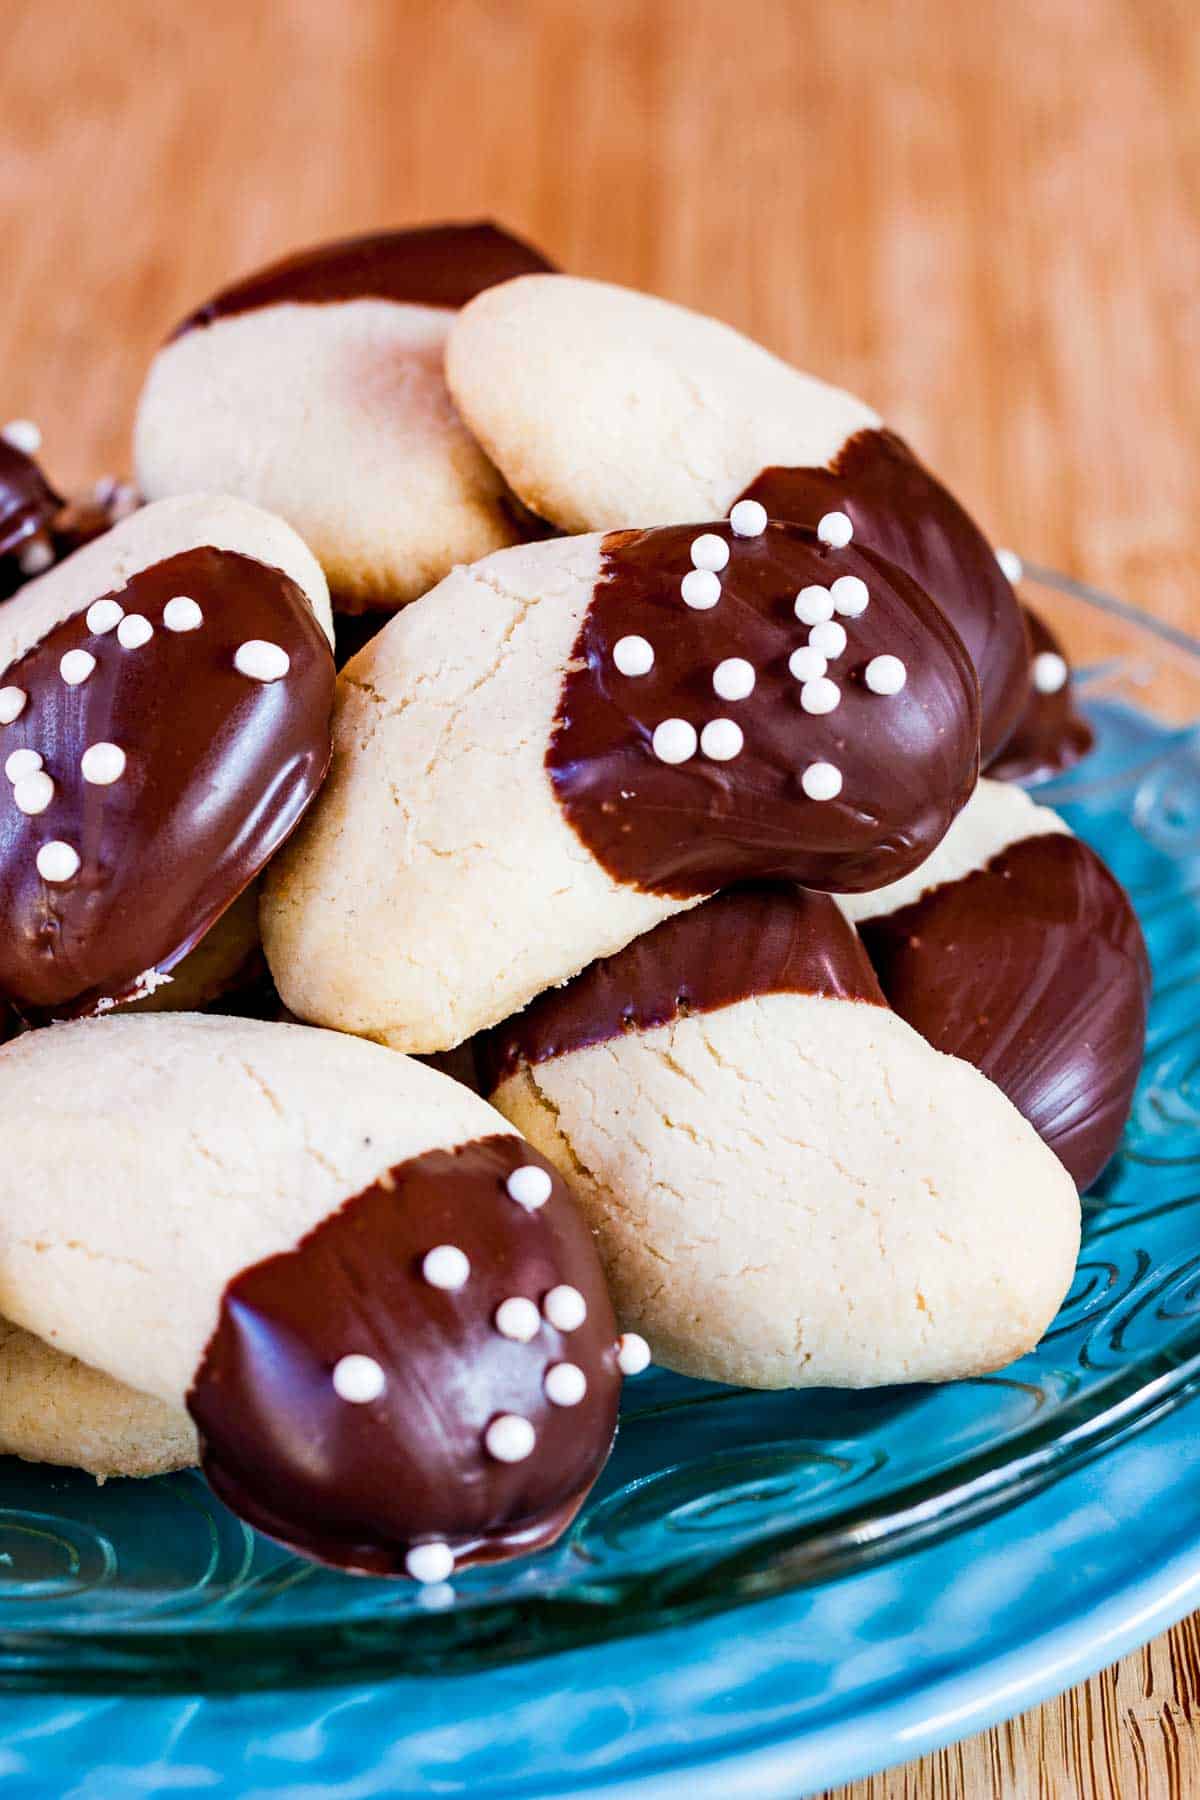 A pile of chocolate-dipped gluten free almond crescent cookies on a glass plate set on top of a light blue dish.